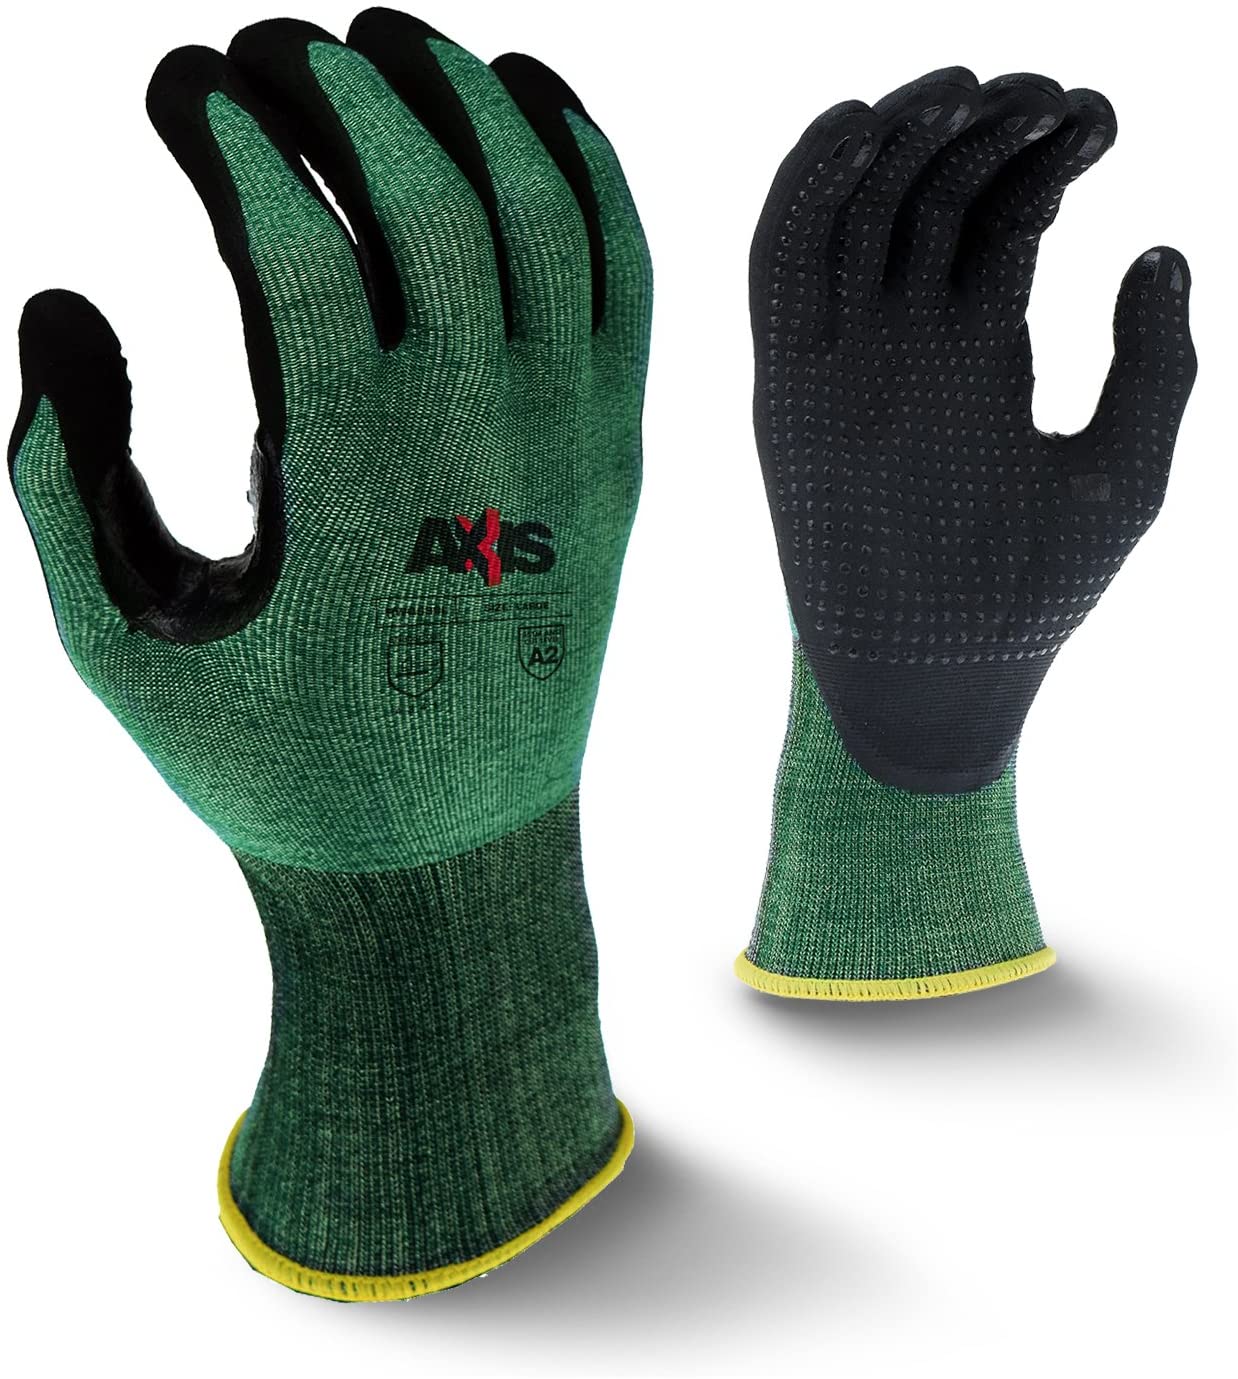 Radians Large Axis Cut Protection Level 2 Nitrile Coated Glove W/ Dotted Palm